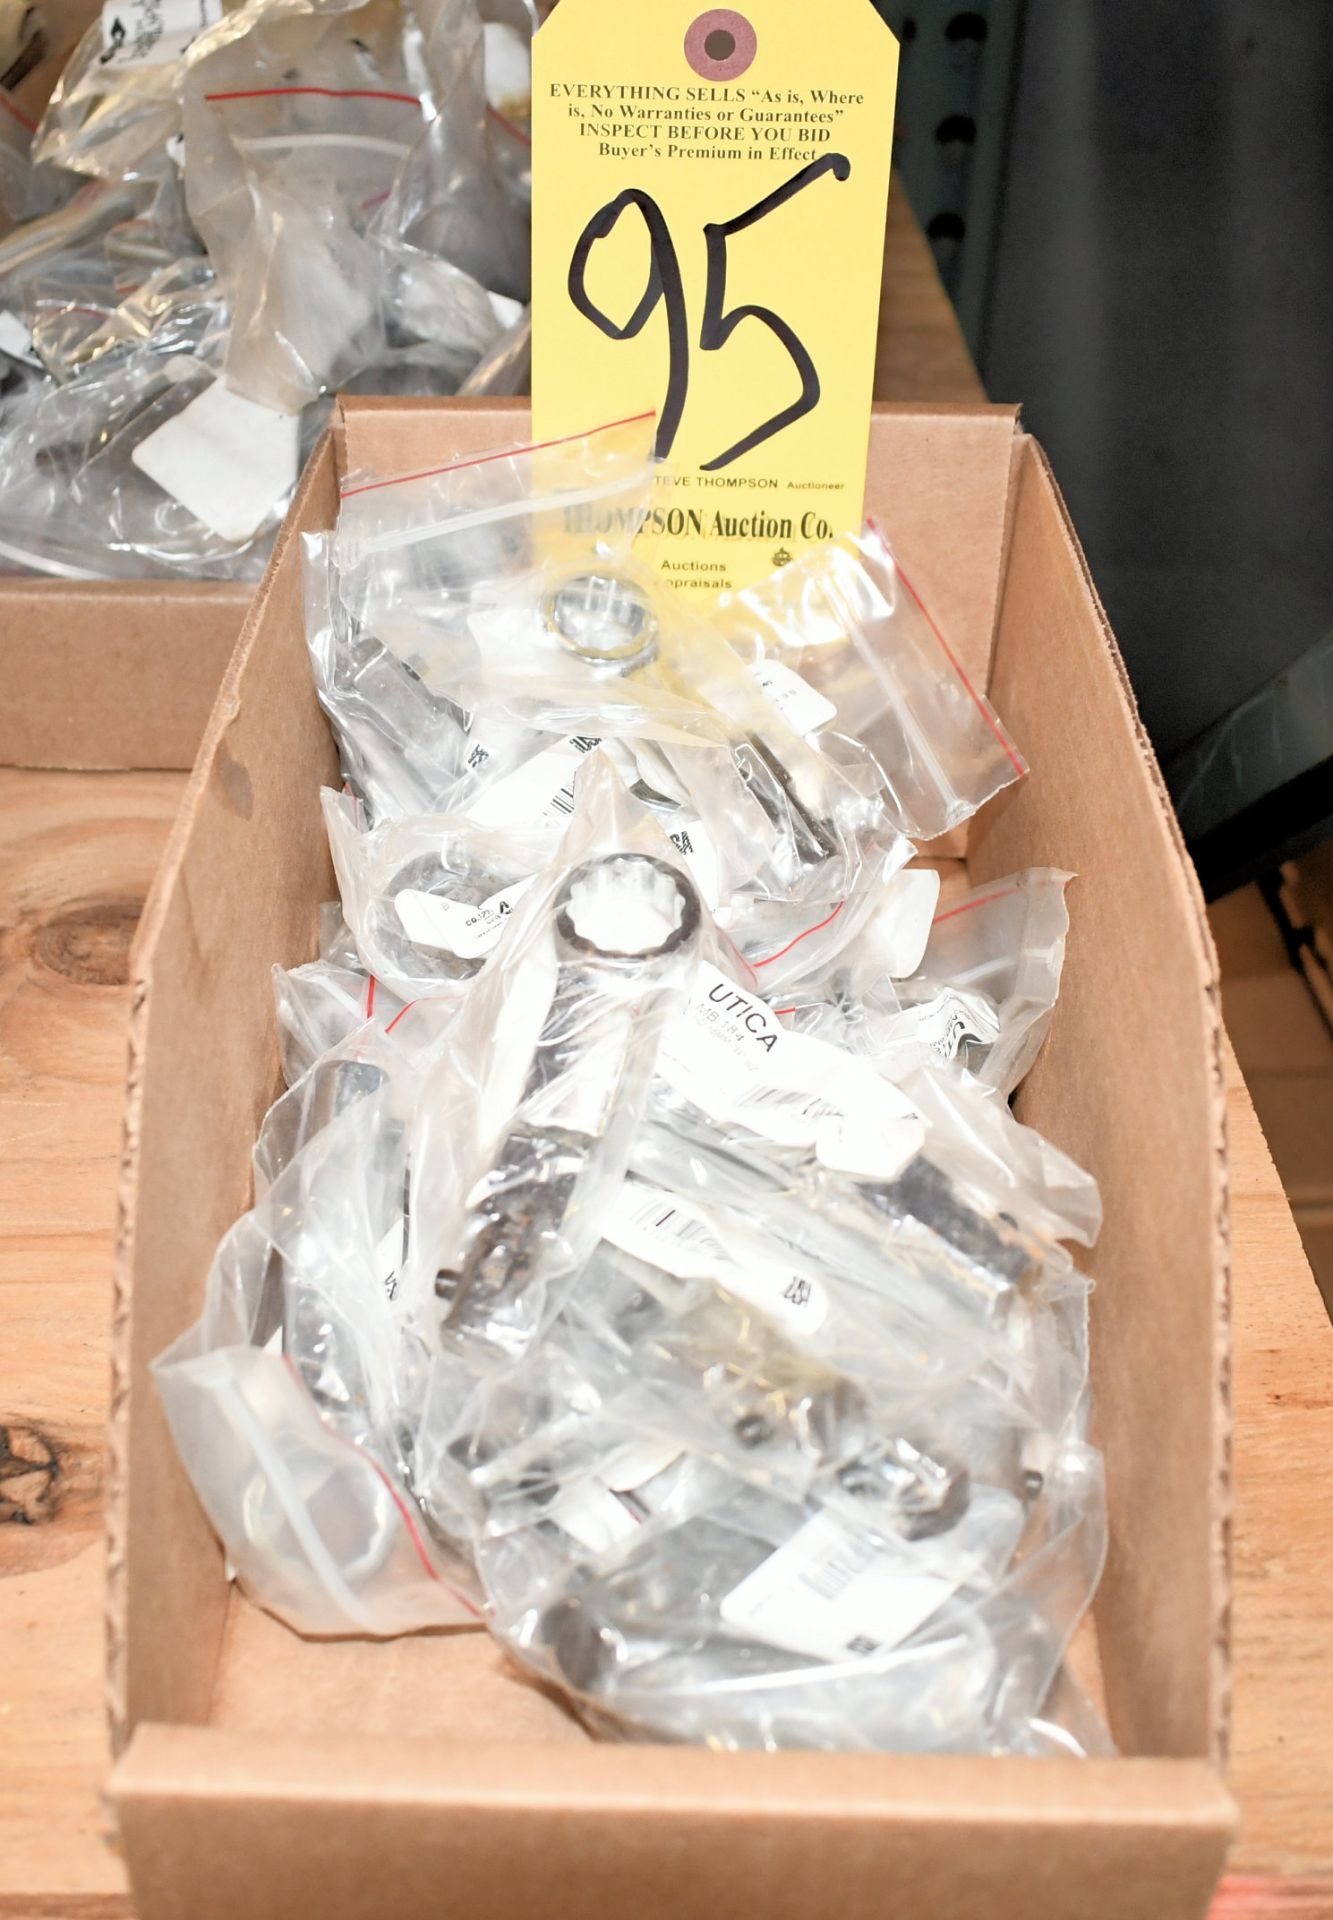 Lot-Utica MB-184, 18mm Wrench Interchangeable Torque Wrench Head Attachments in (1) Box, (Bldg 2)